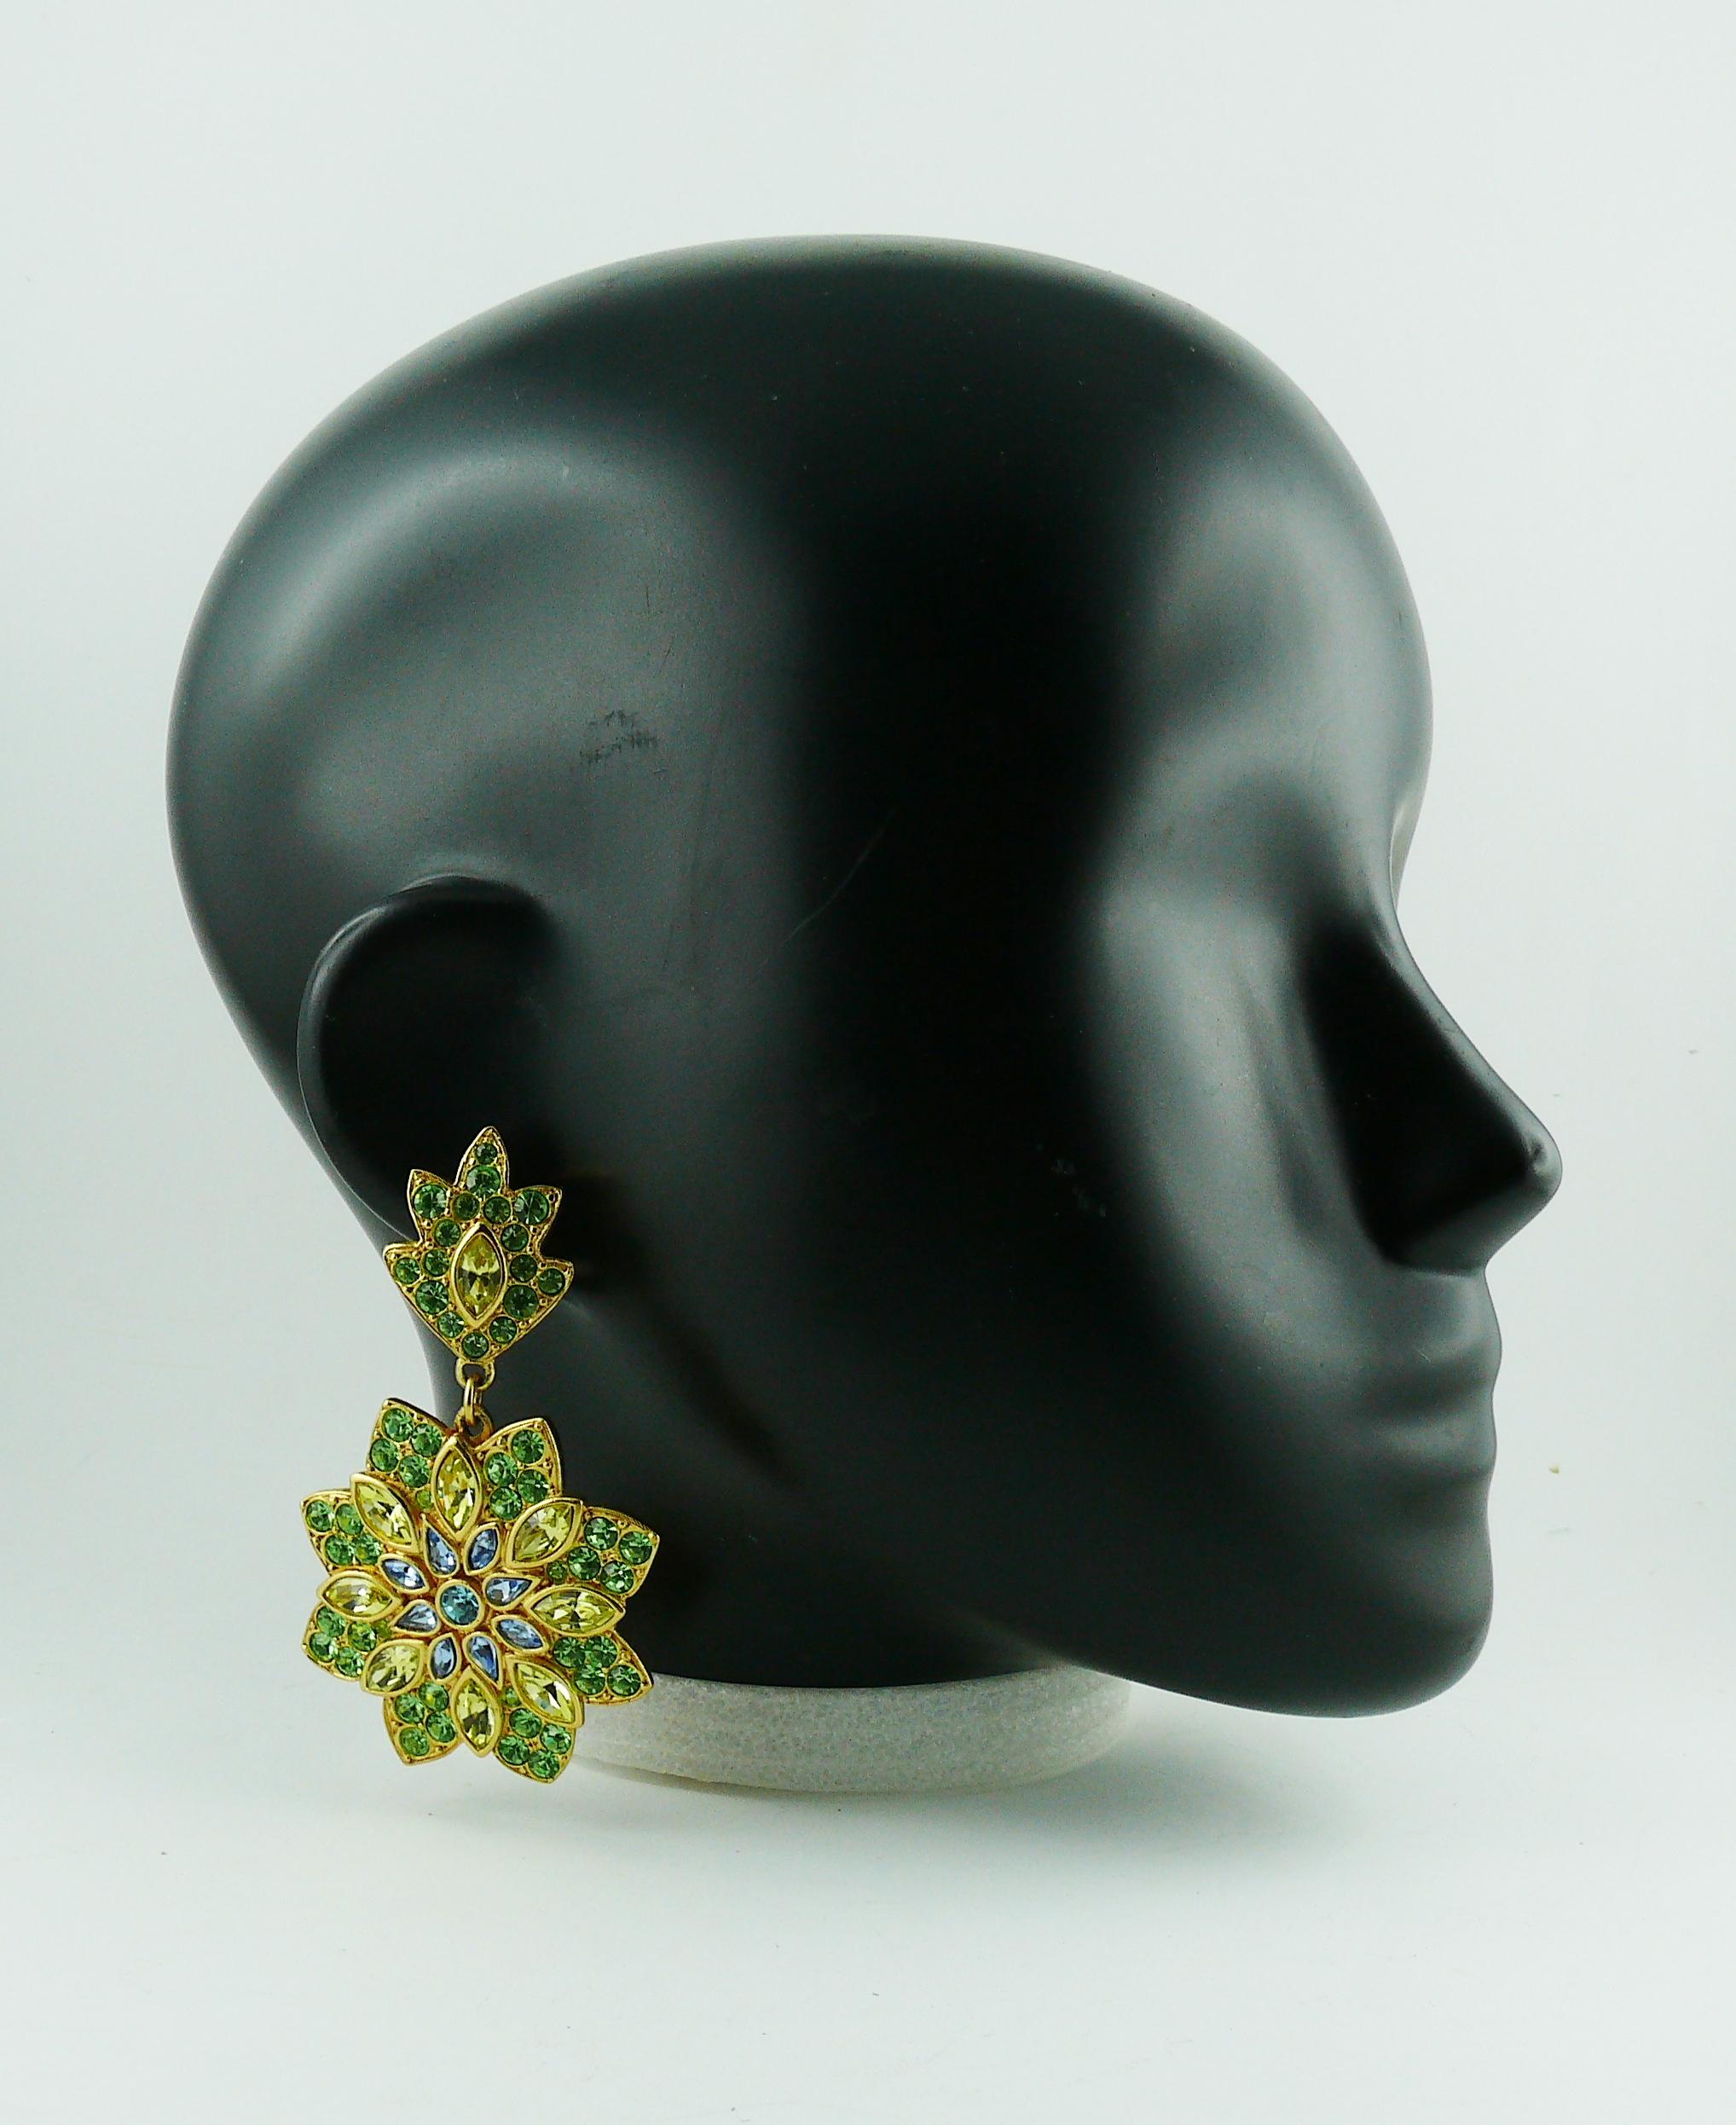 YVES SAINT LAURENT vintage gold toned dangling earrings (clip on) featuring a massive flower embellished with multicolored crystals.

Embossed YSL Made in France.

Indicative measurements : max. height 8.2 cm (3.23 inches) / max. width approx. 4.8